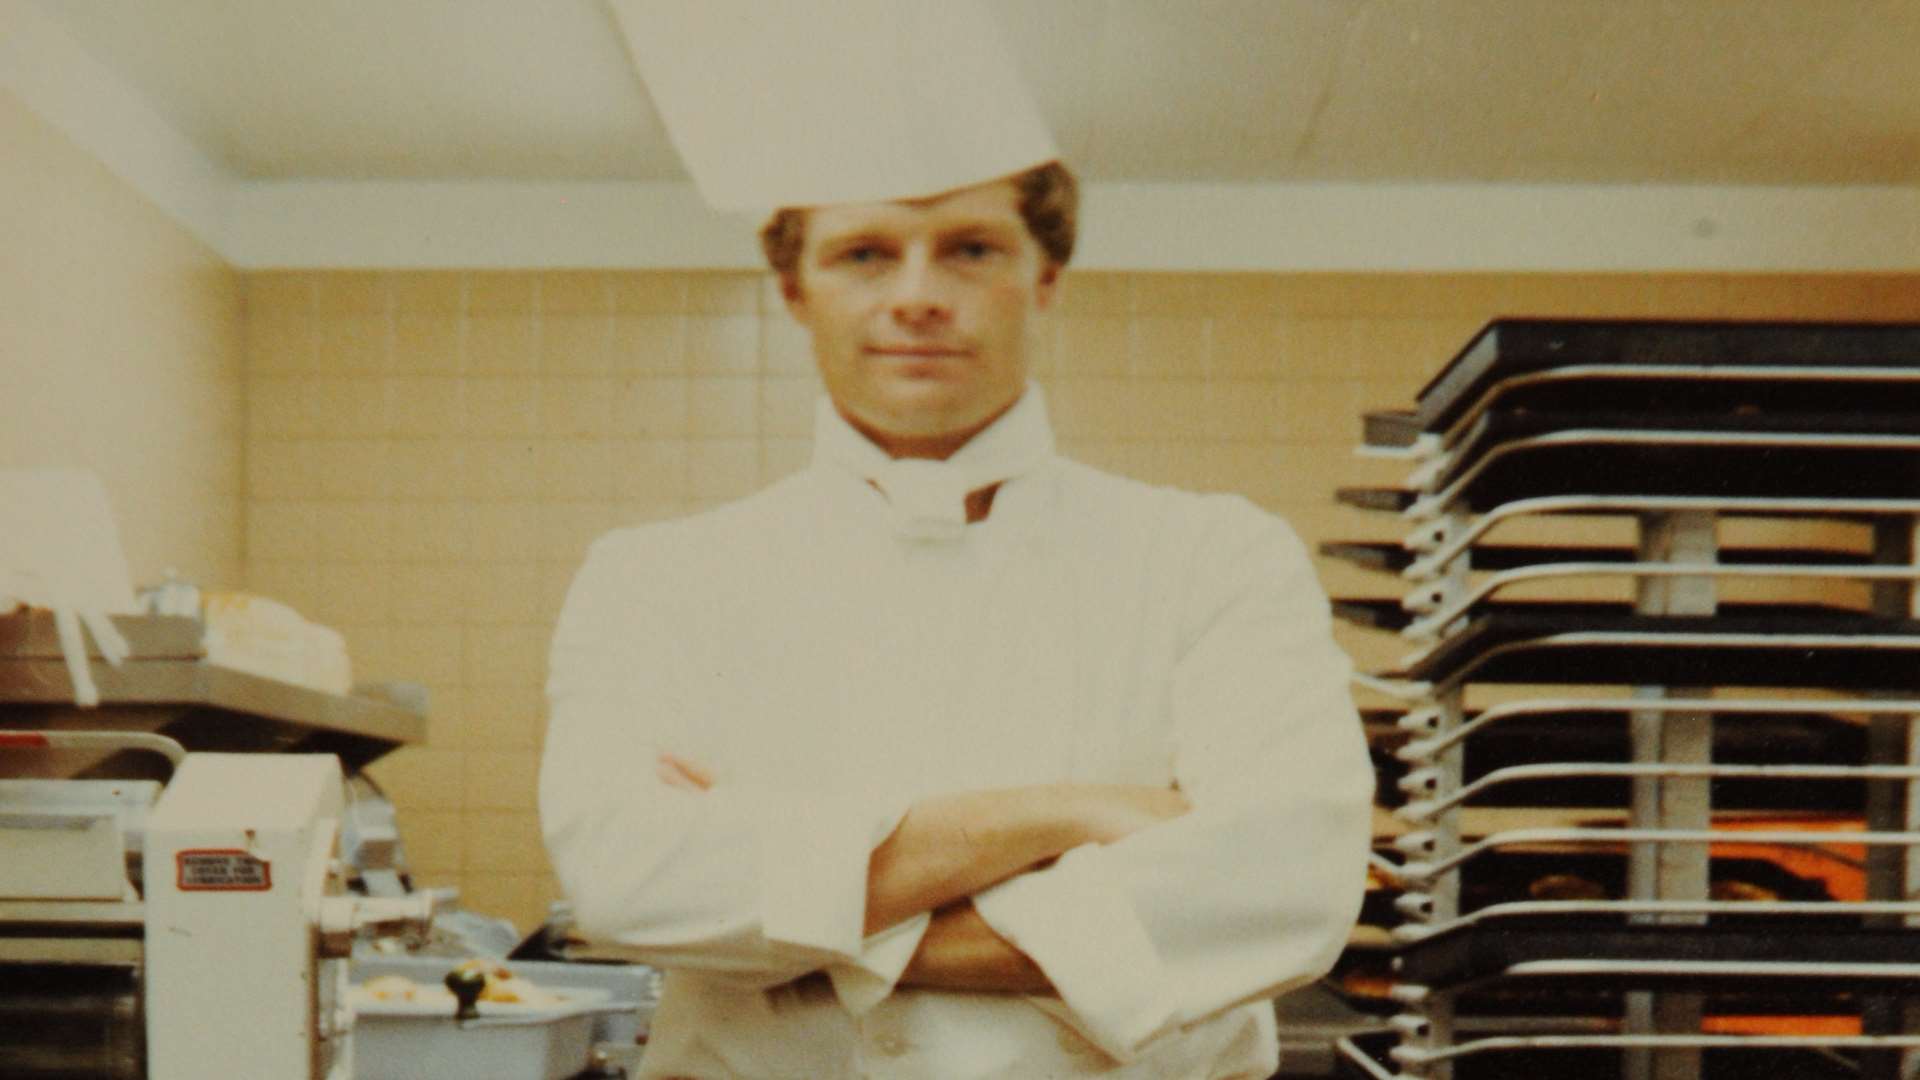 Stephen Chater at work as a baker